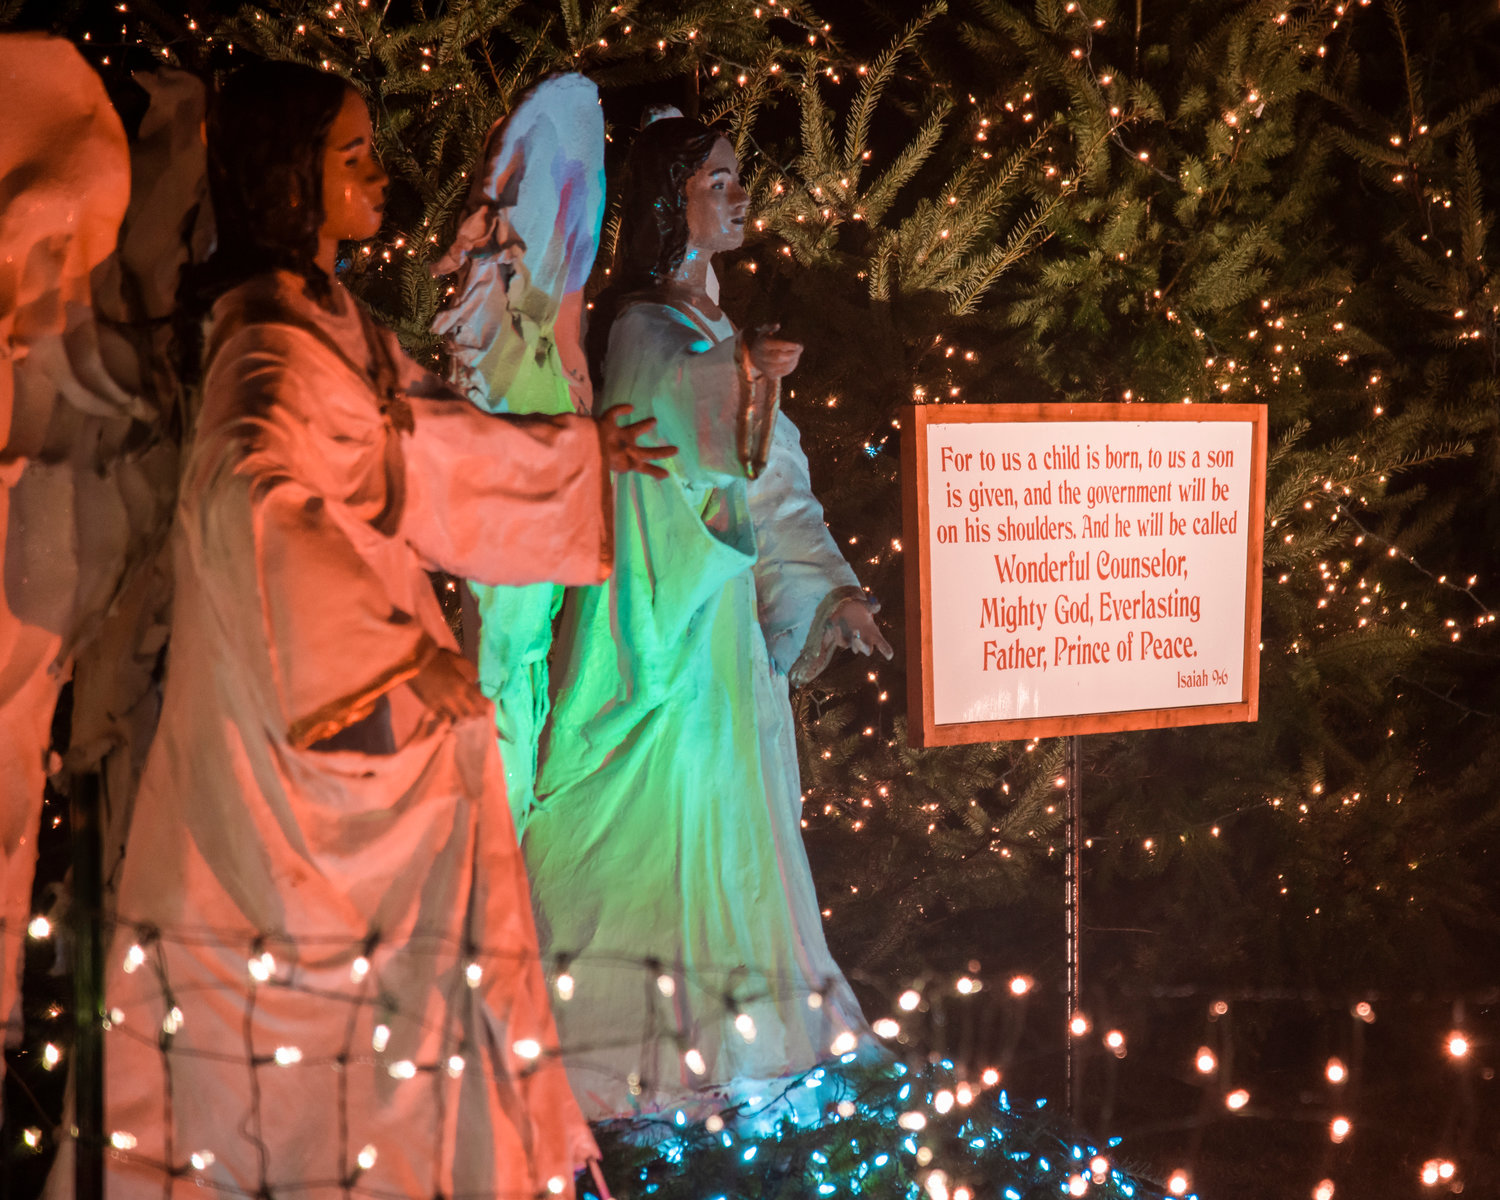 Scriptures are displayed on signs near statues of angels with wings in motion during the Christmas Island Lighting Ceremony in Maytown on Saturday.